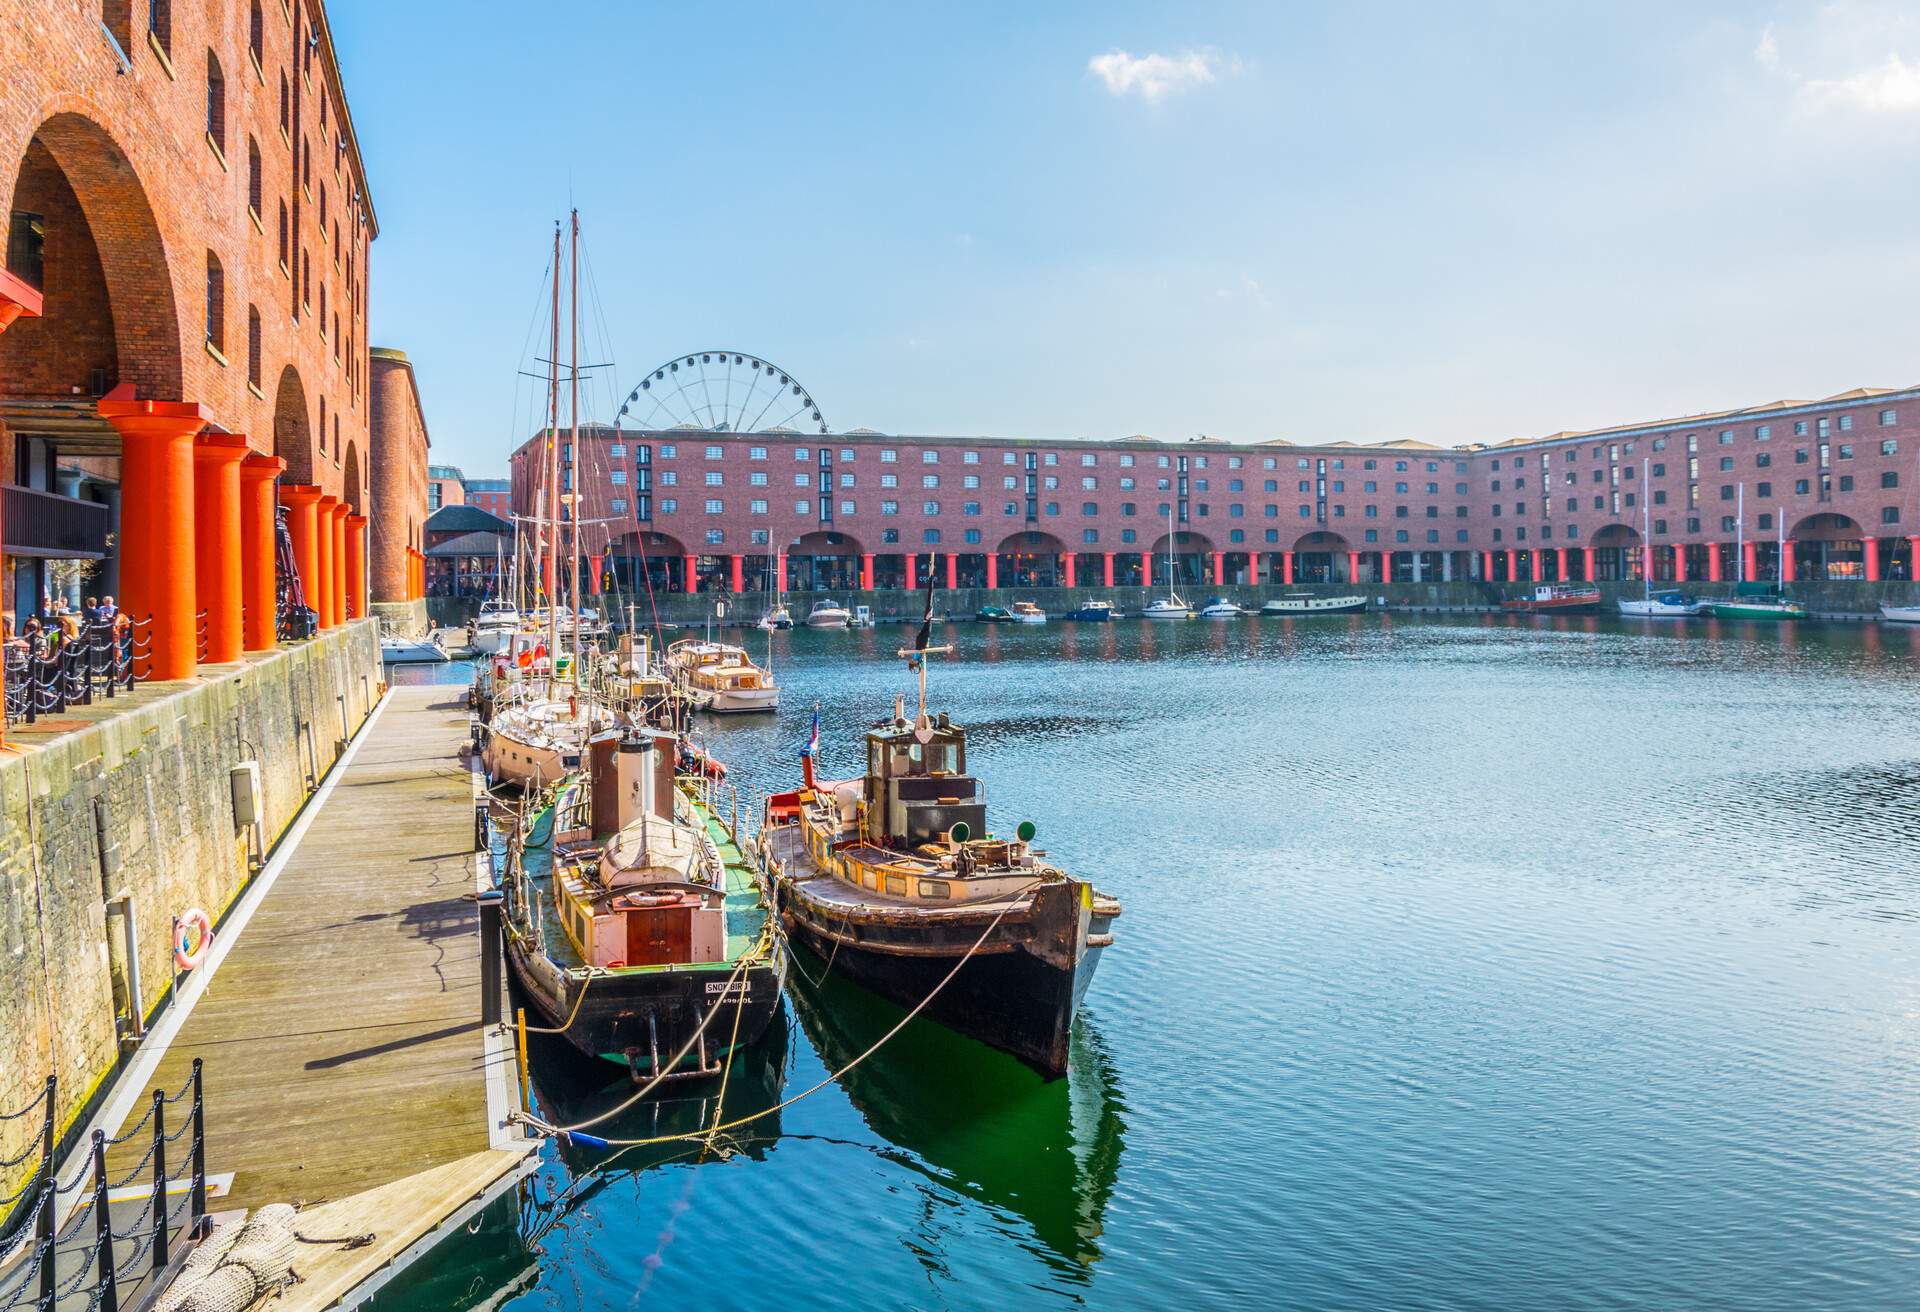 Albert dock in Liverpool during a cloudy day, England